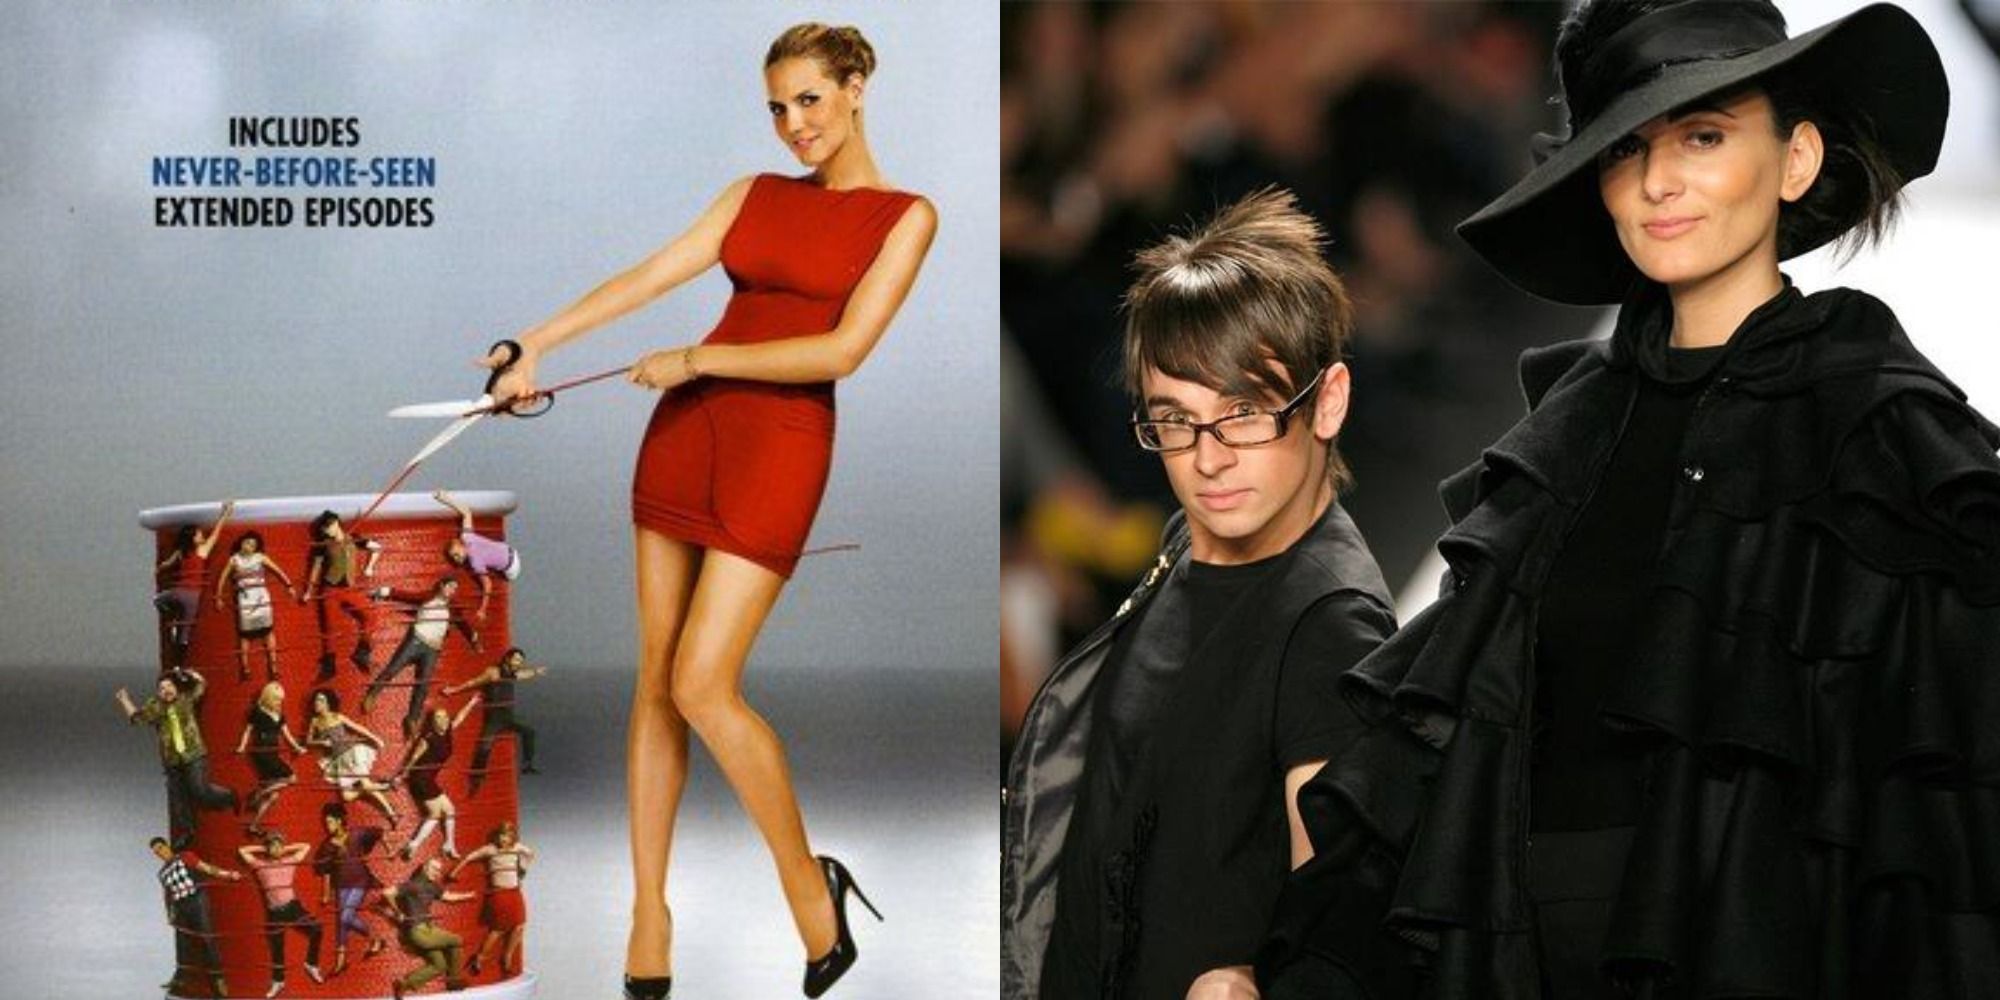 Split image showing Heidi Klum and the cast of project Runway season 4, and Christian Siriano with his model